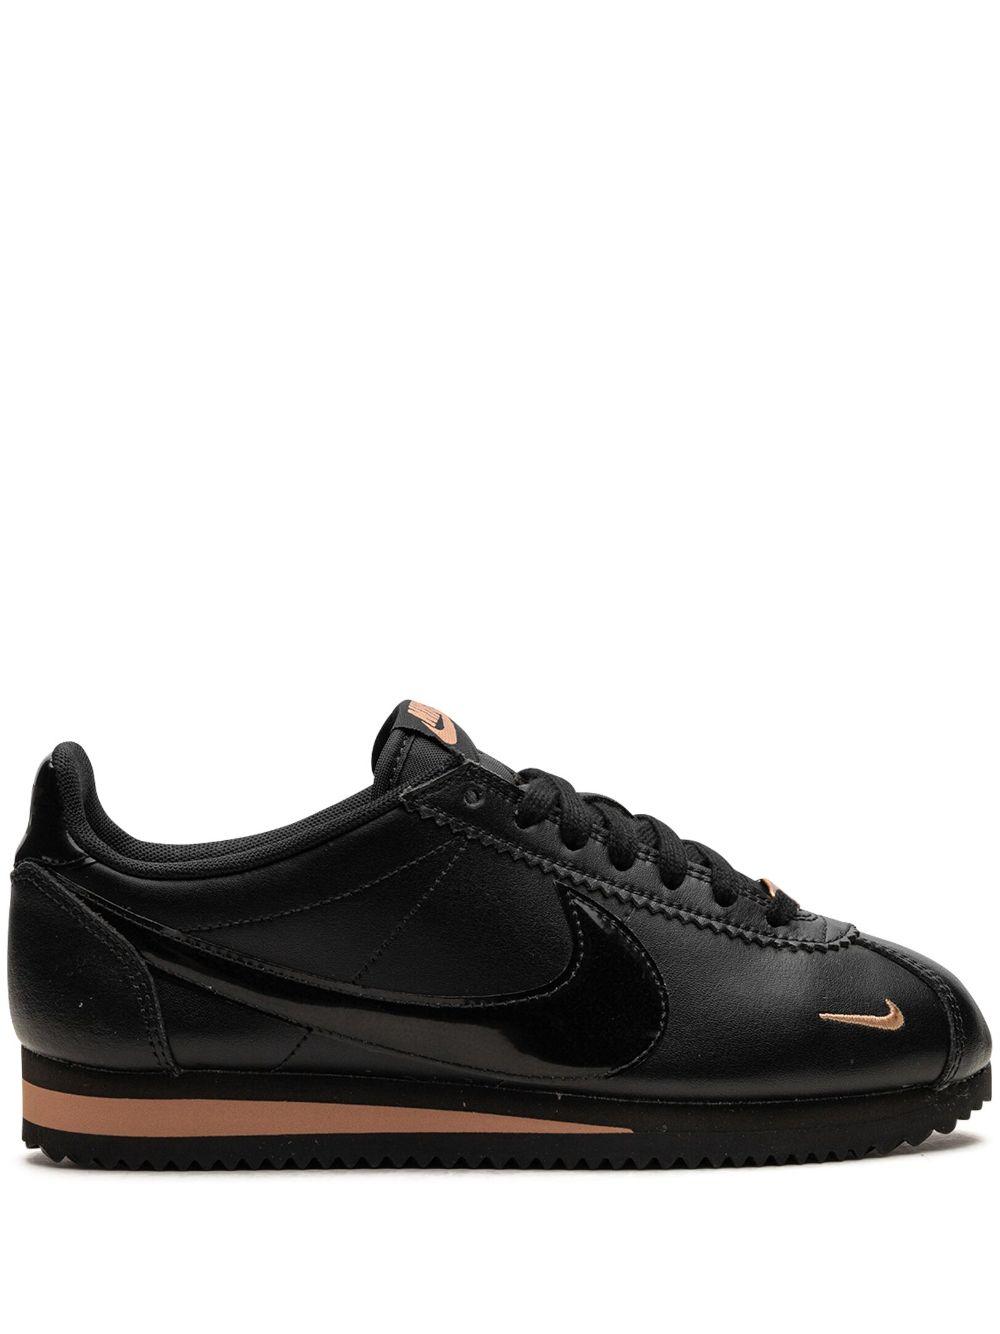 Nike Classic Cortez "black Rose Gold" Sneakers | Lyst